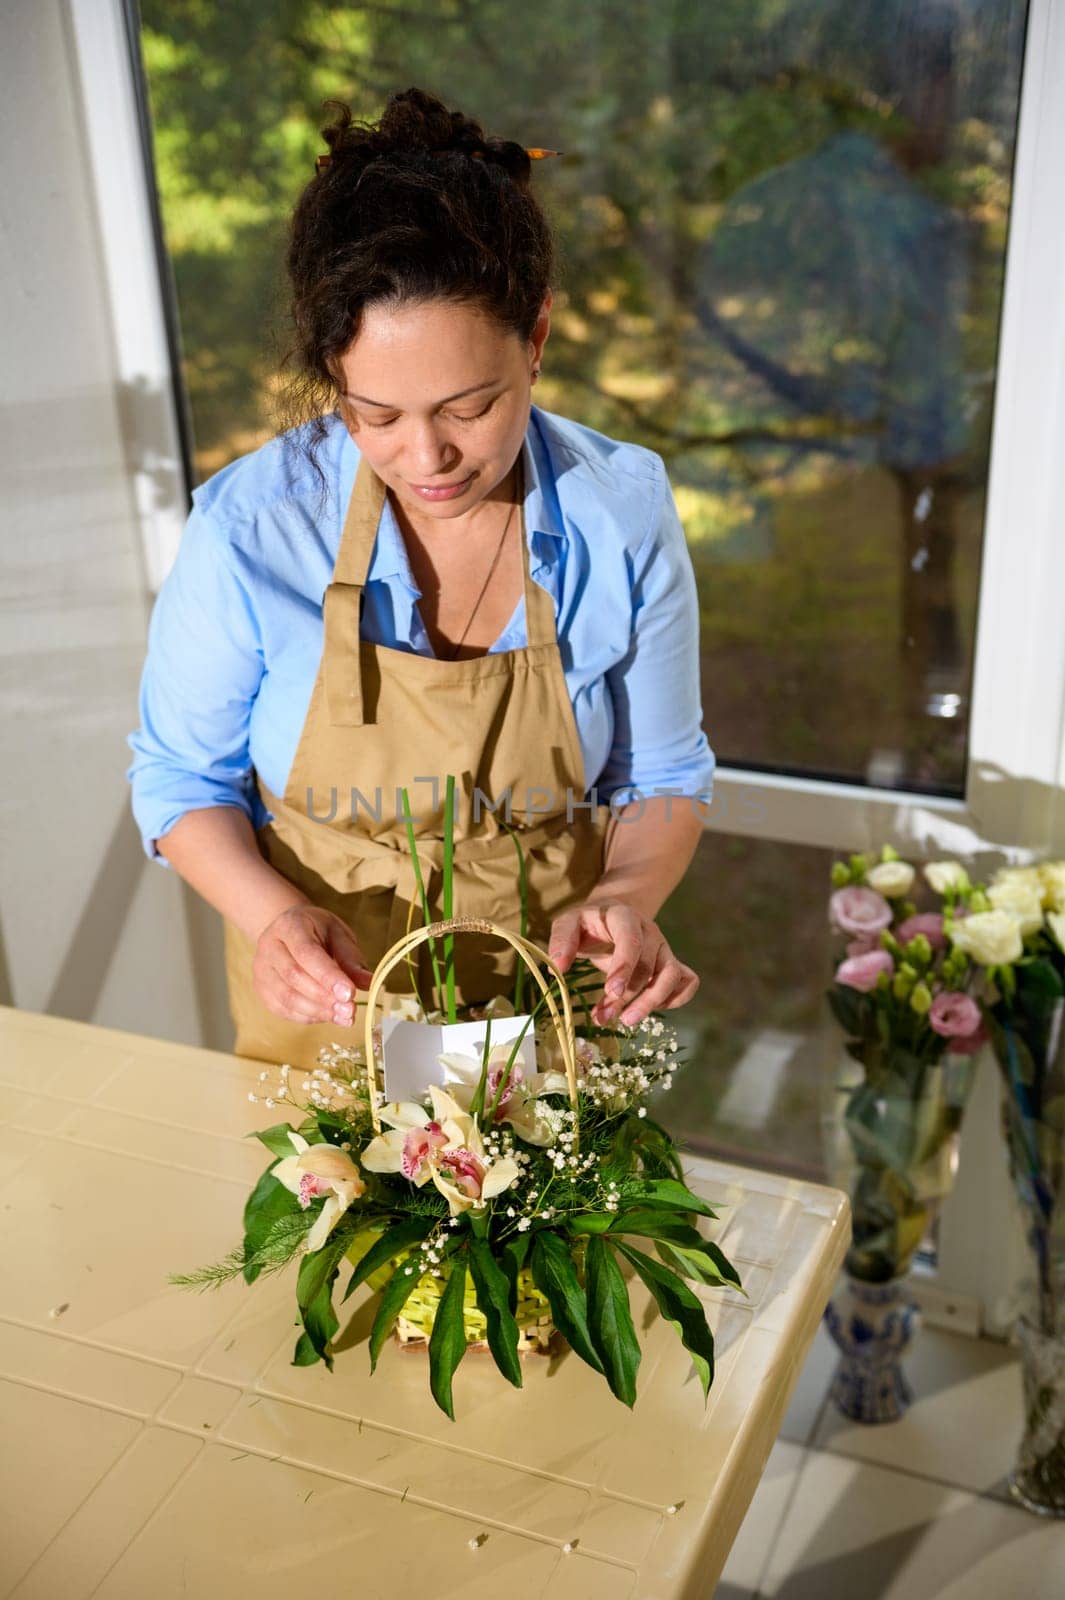 Florist creating a flower arrangement with fresh orchid flowers and plants, inserting a birthday card, in floral shop by artgf